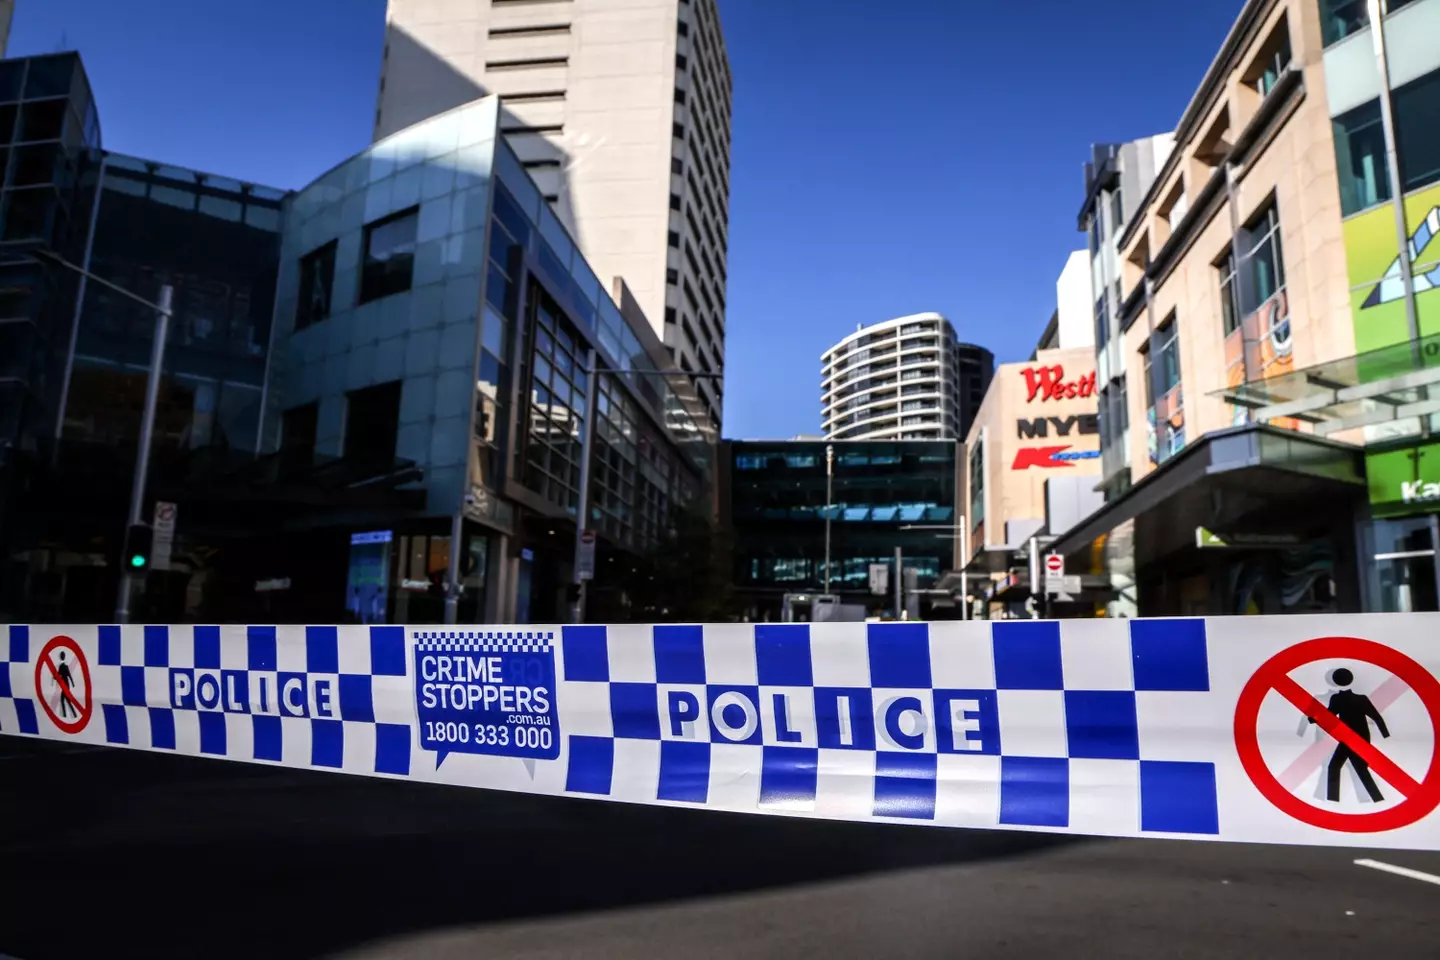 The incident took place at Westfield Bondi Junction shopping mall (DAVID GRAY/AFP via Getty Images) 